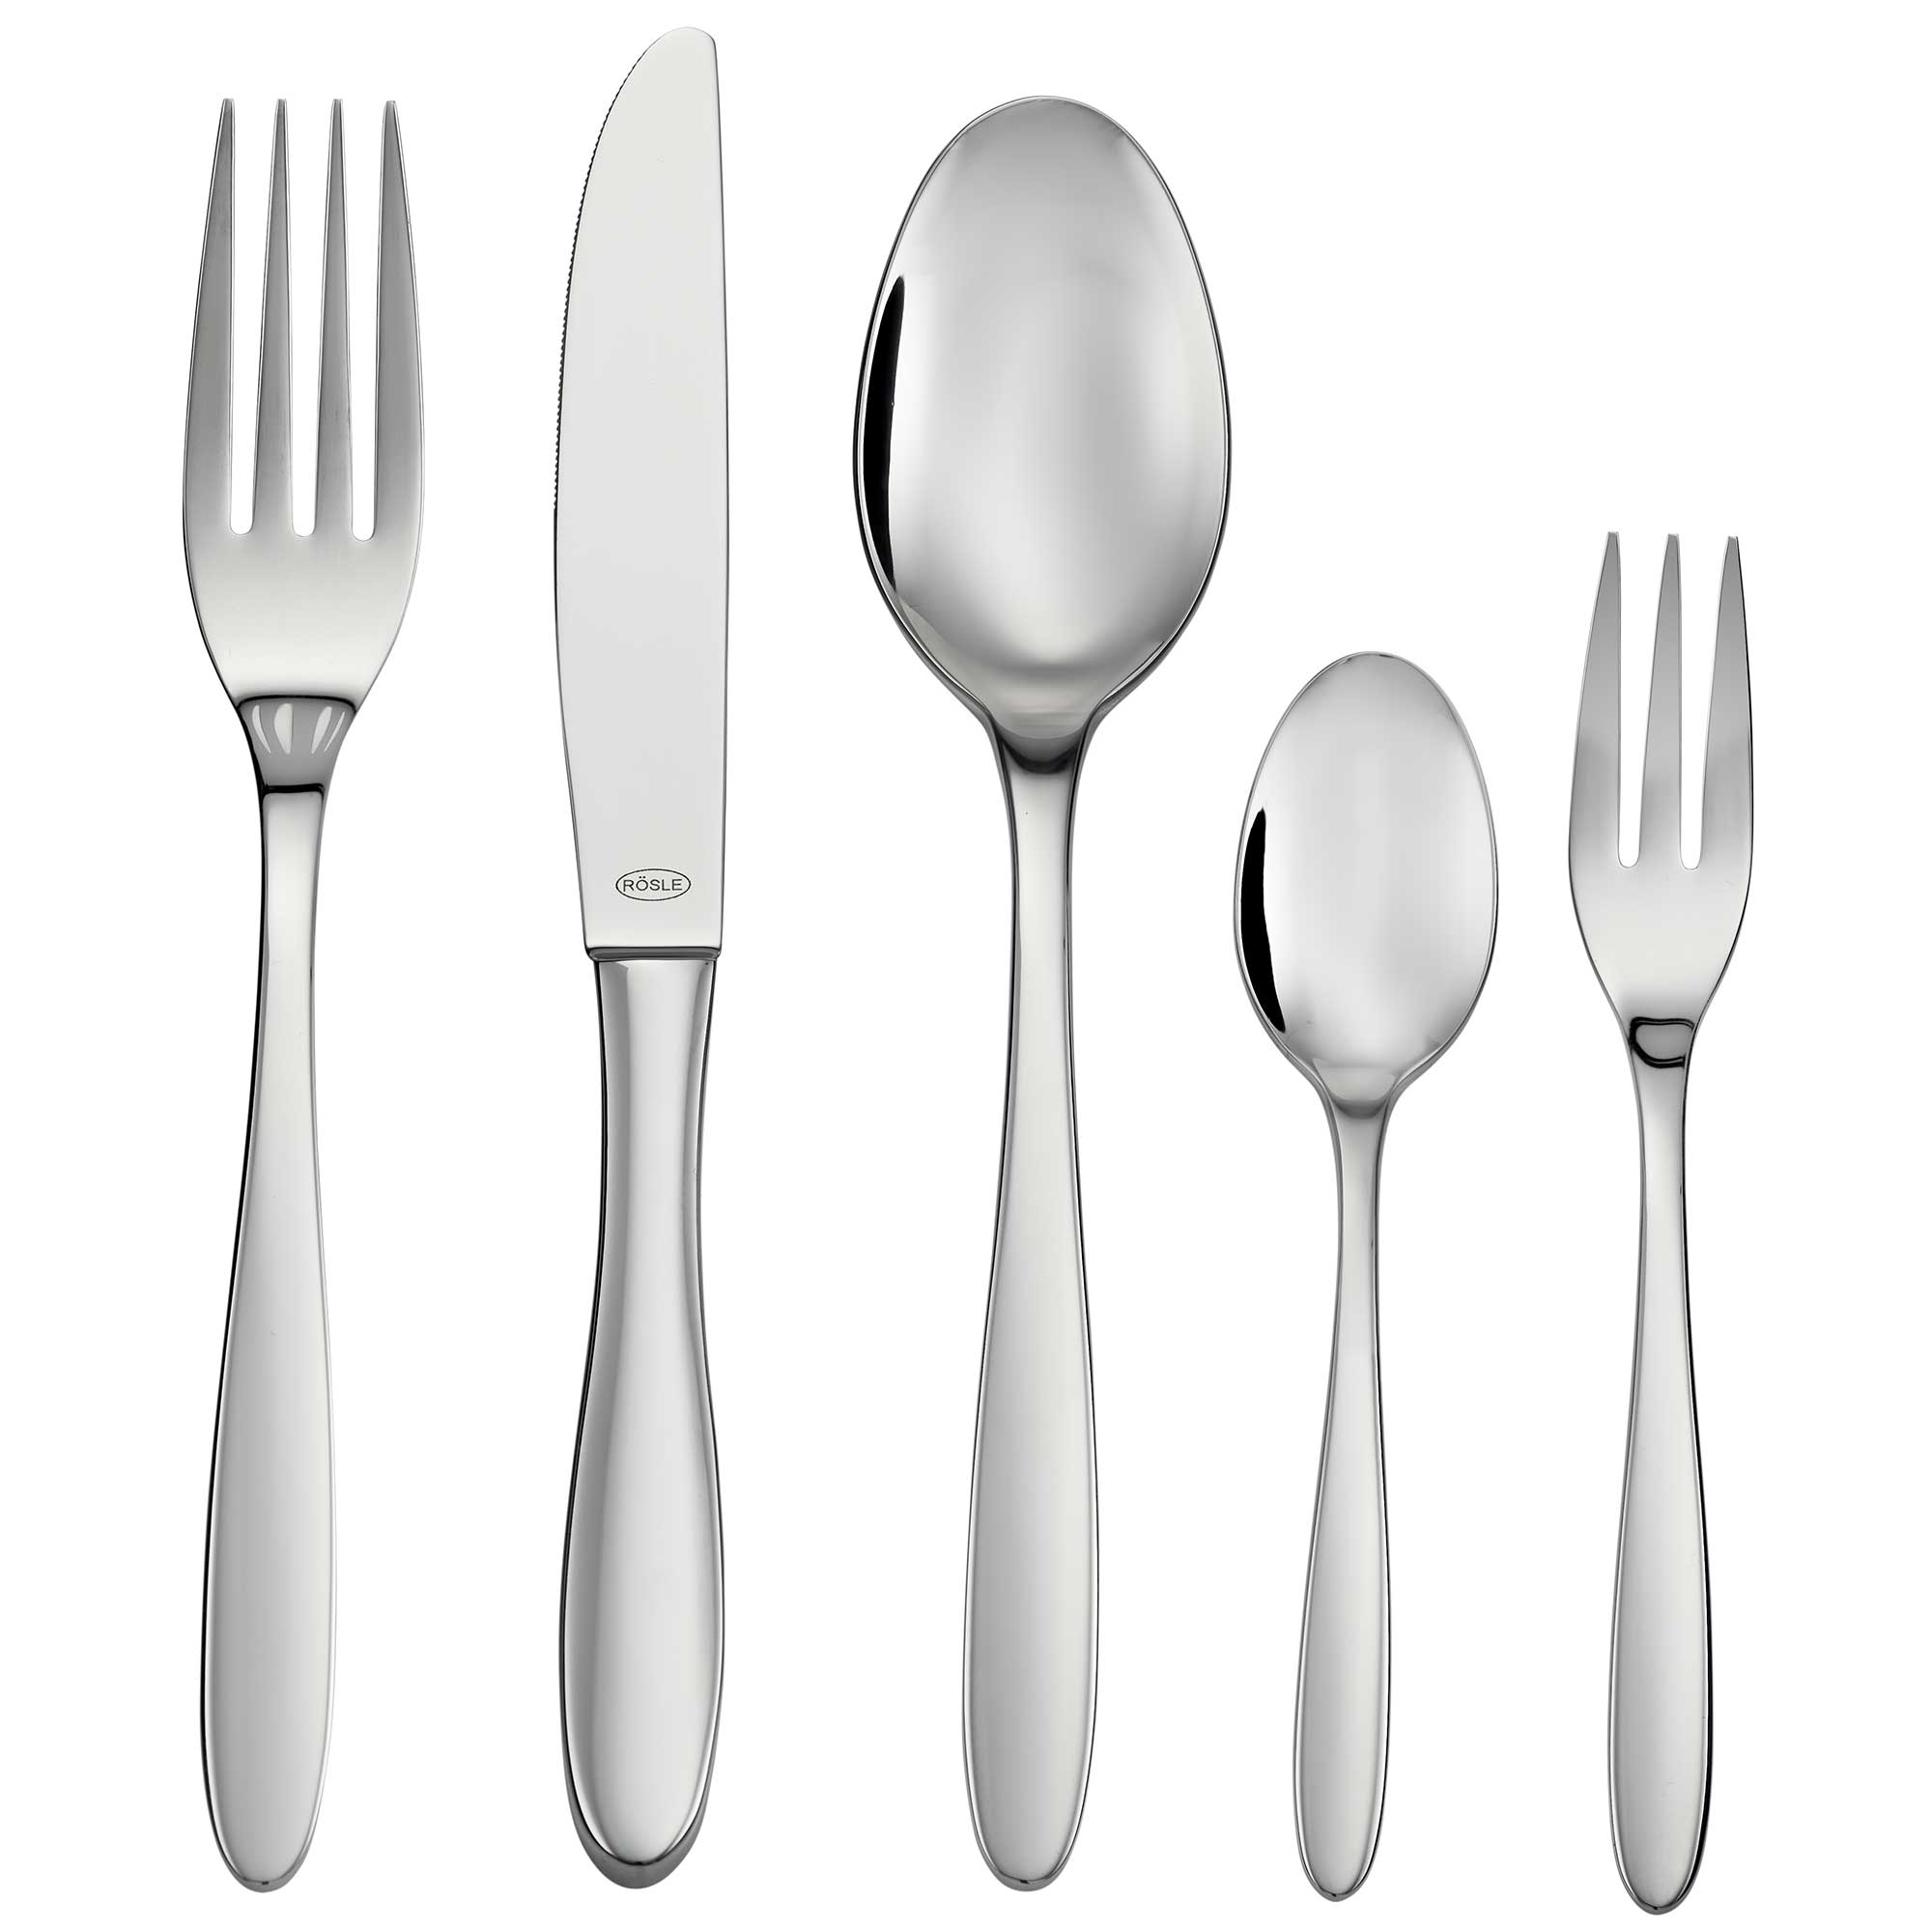 RÖSLE Culture Stainless Steel 30 Piece Cutlery Set - Mirror Finish